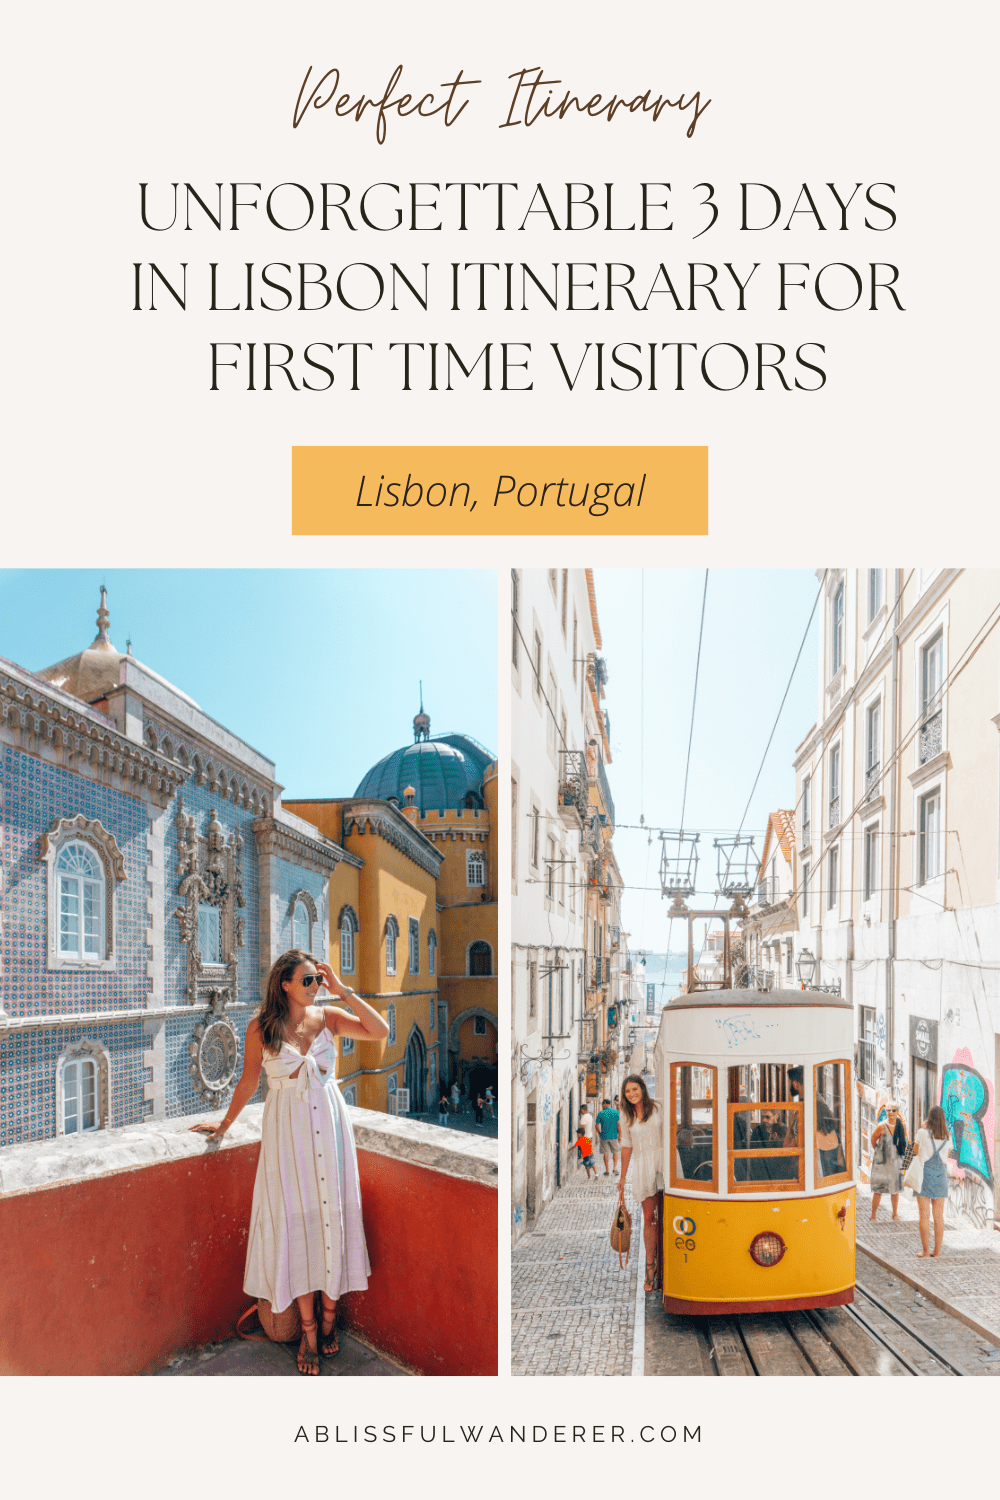 Unforgettable 3 Days in Lisbon Itinerary for First Time Visitors pin with 2 photos 